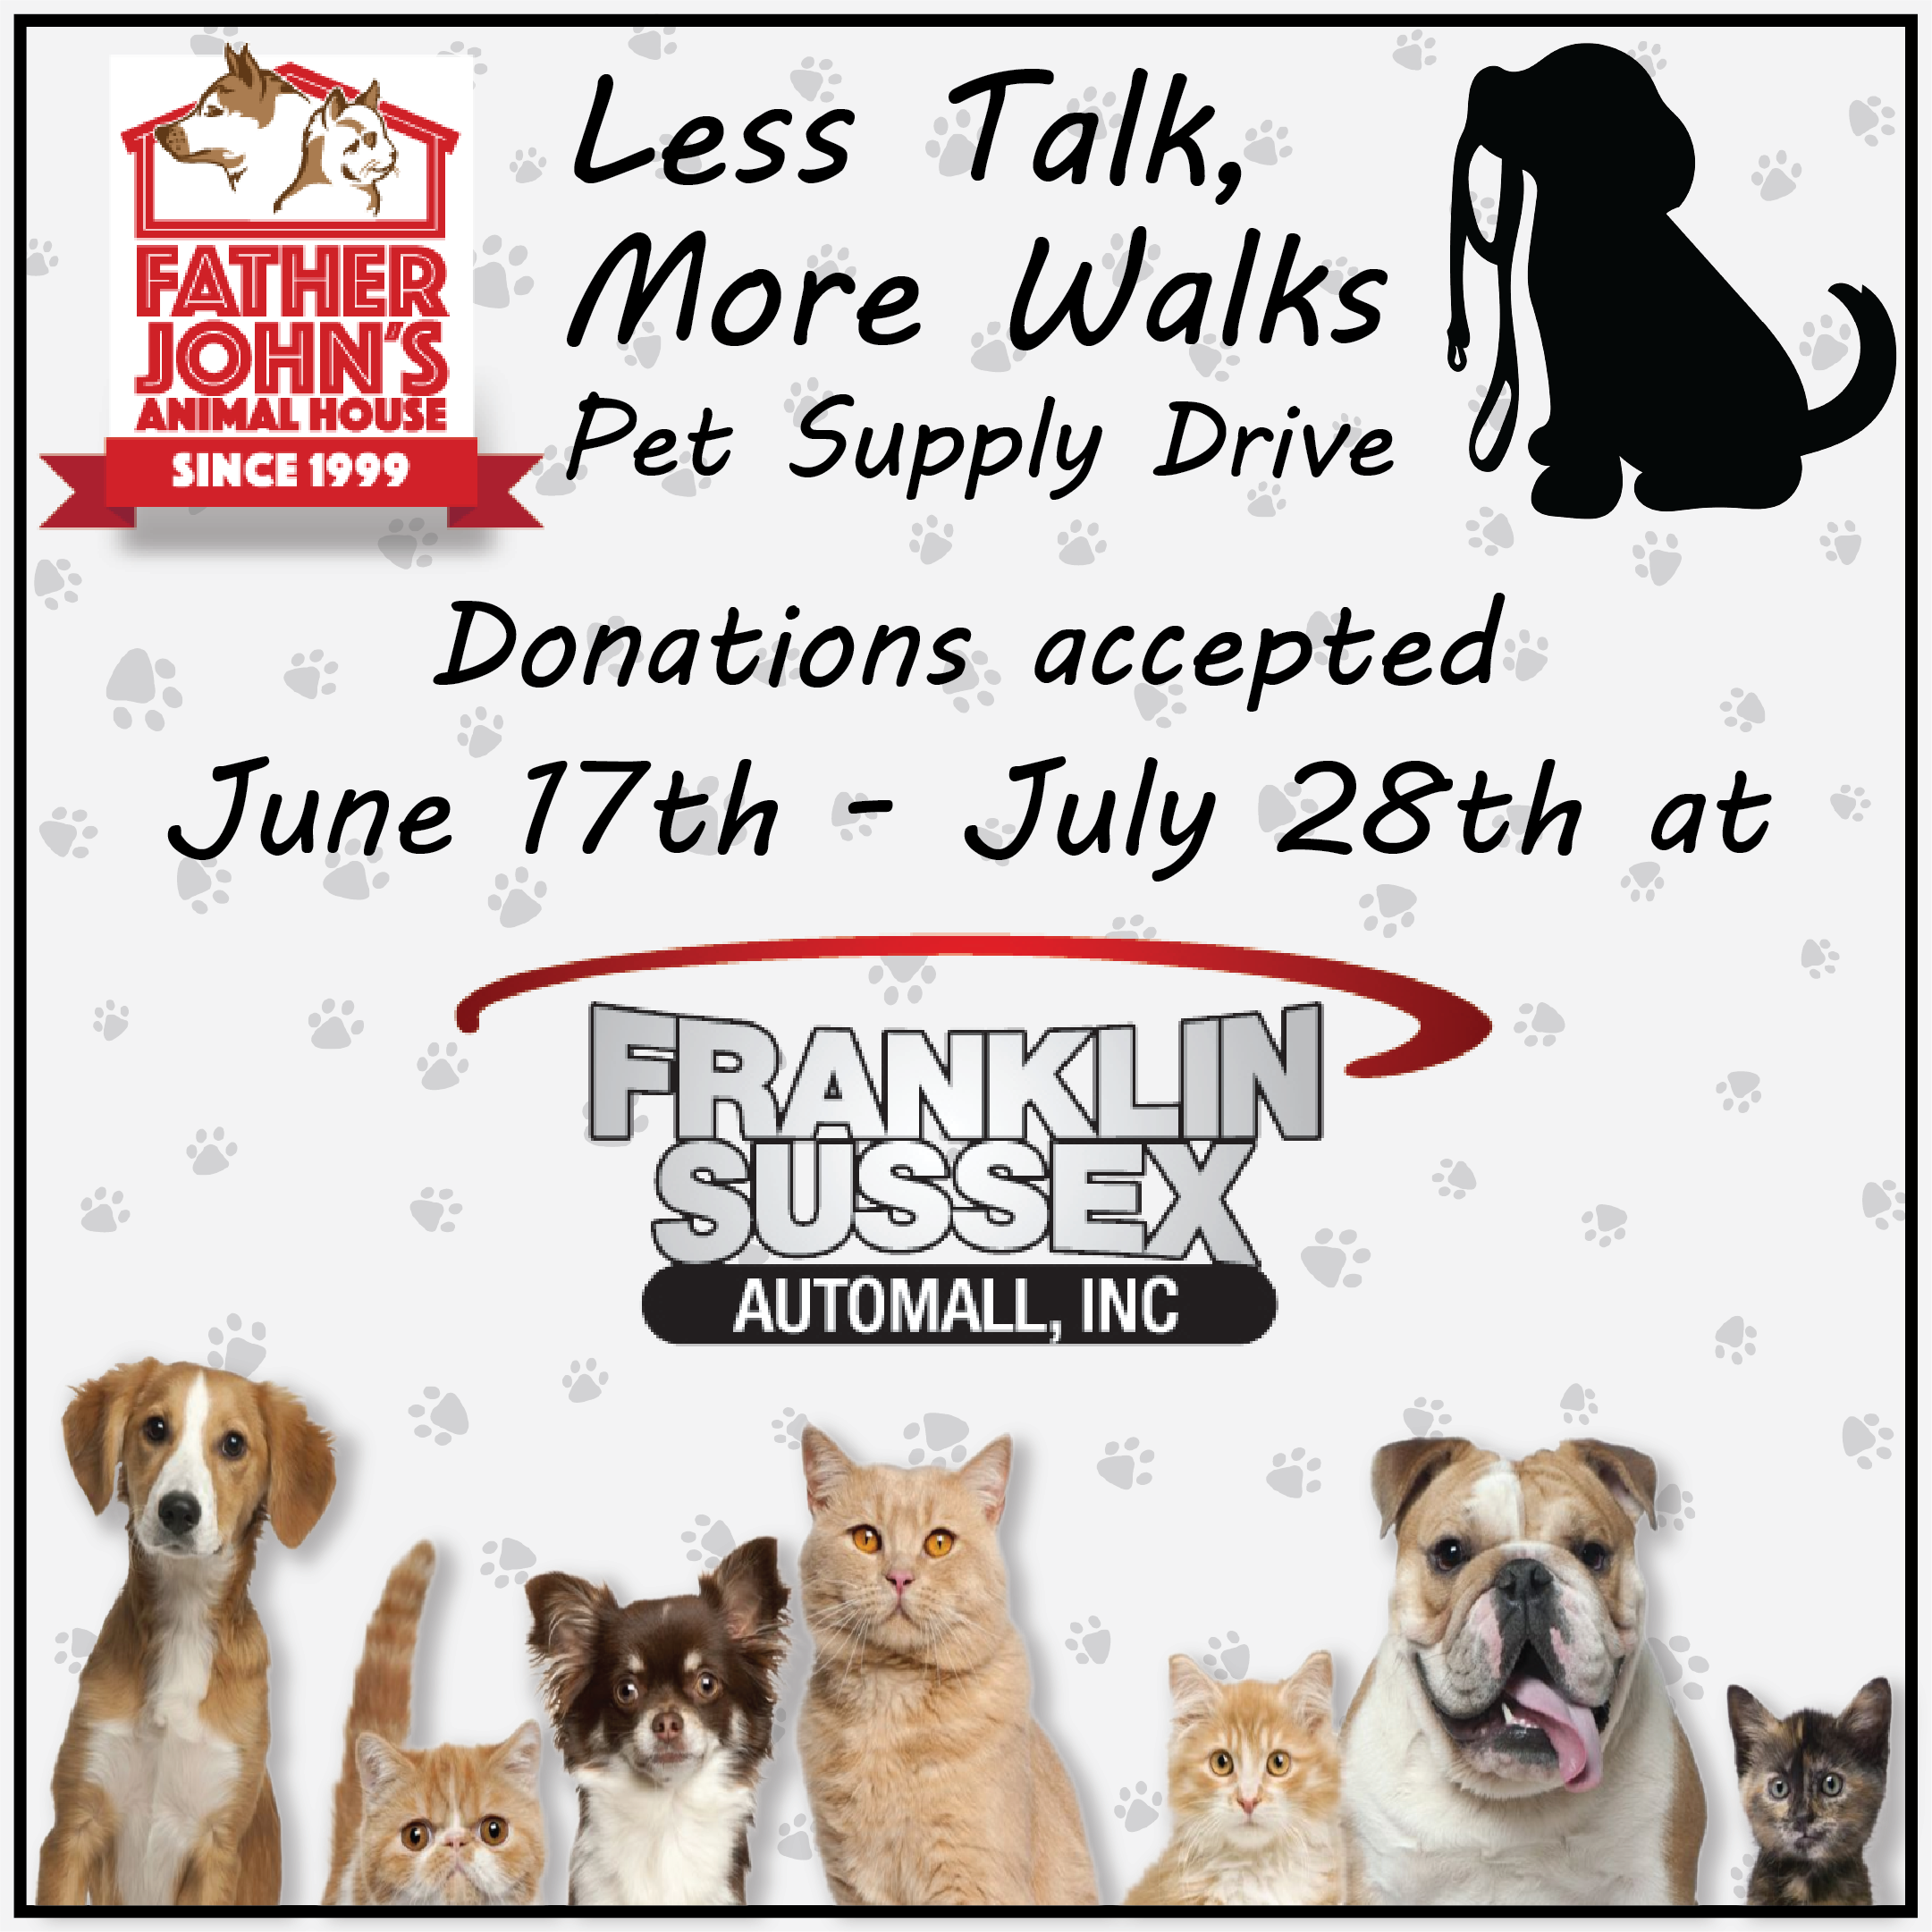 Less Talk, More Walks Pet Supply Drive to benefit Father John's Animal House. Donations accepted June 17th  to July 28th at Franklin Sussex Automall, Inc.